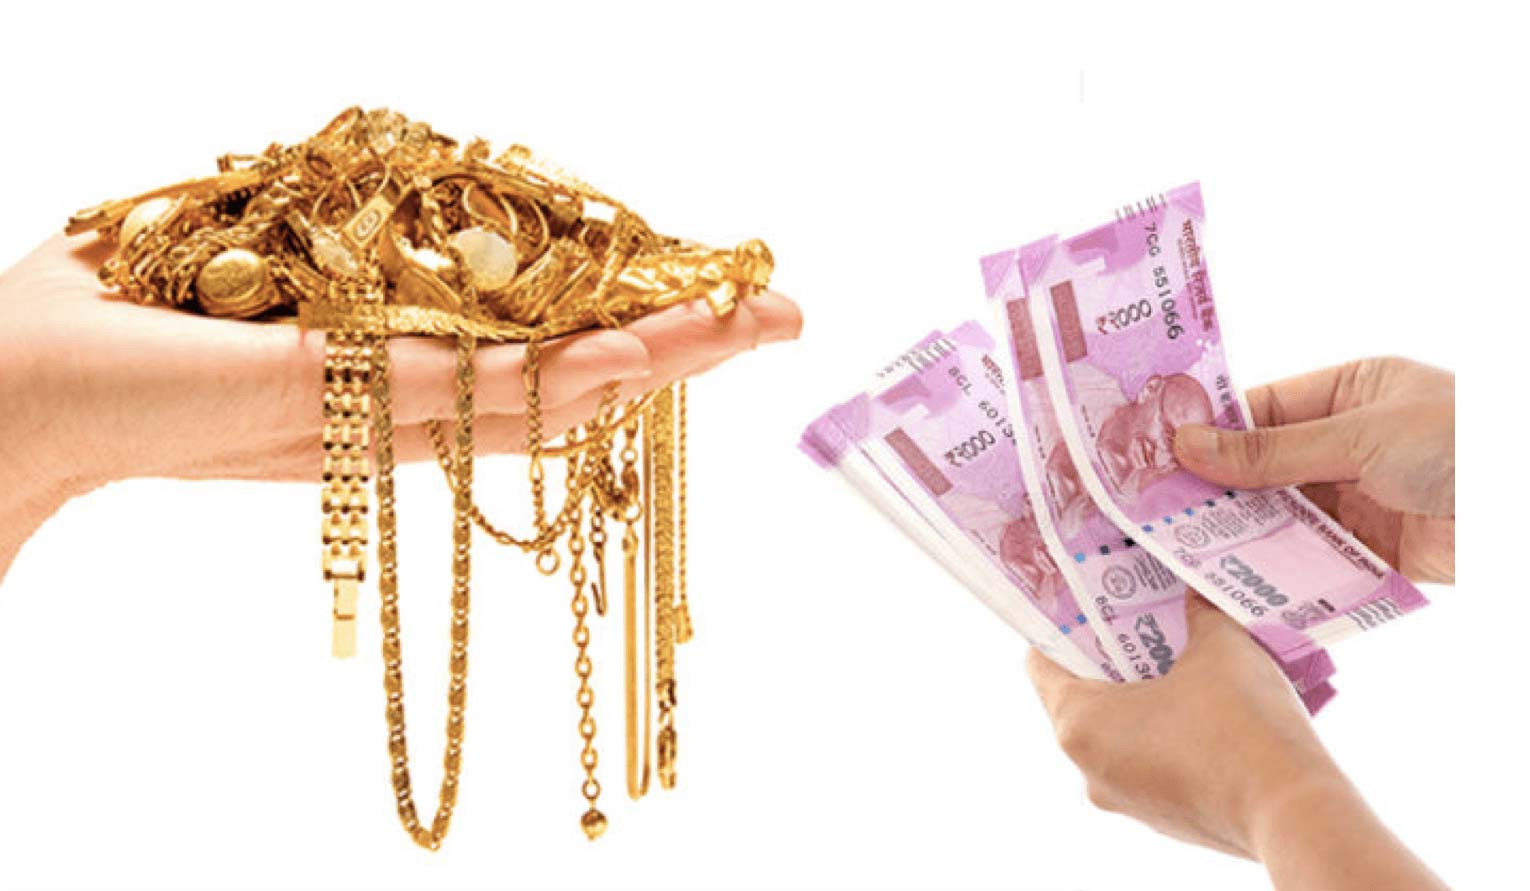 Sell Gold, Cash for Gold, Cash for Gold Panchkula, Cash for Gold near Panchkula, gold buyer in Panchkula, second hand gold buyer in Panchkula, Sell gold in Panchkula, Cash for Gold in Panchkula, Sell Gold for Cash in Panchkula